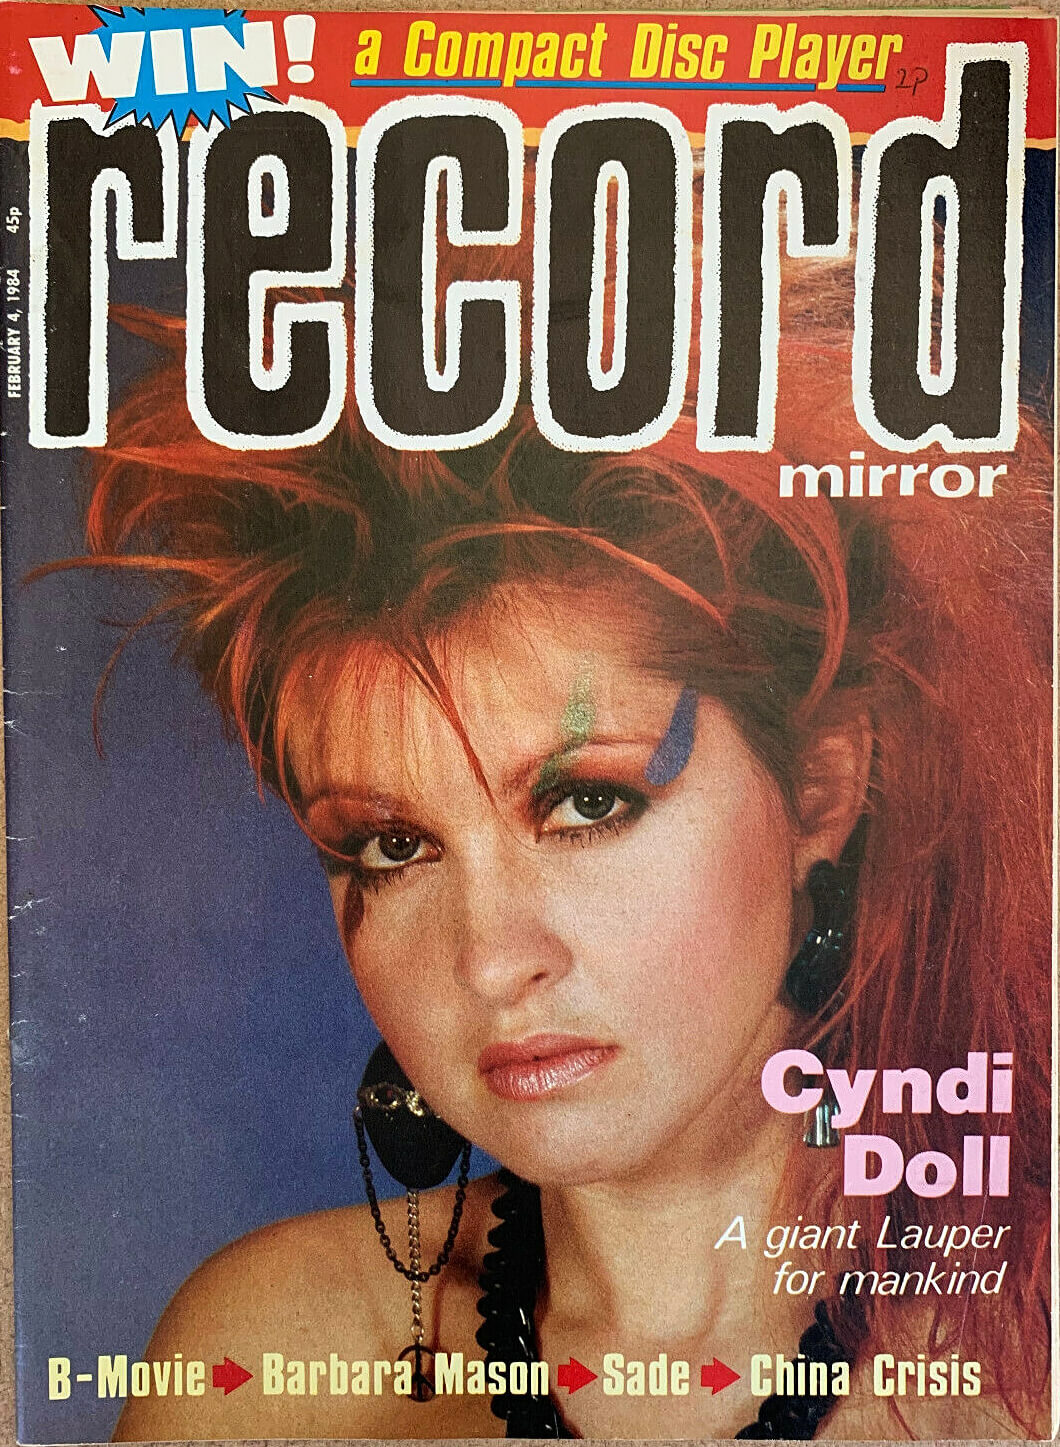 <p>Cyndi Lauper on the front cover of Record Mirror Feb 4, 1984</p>